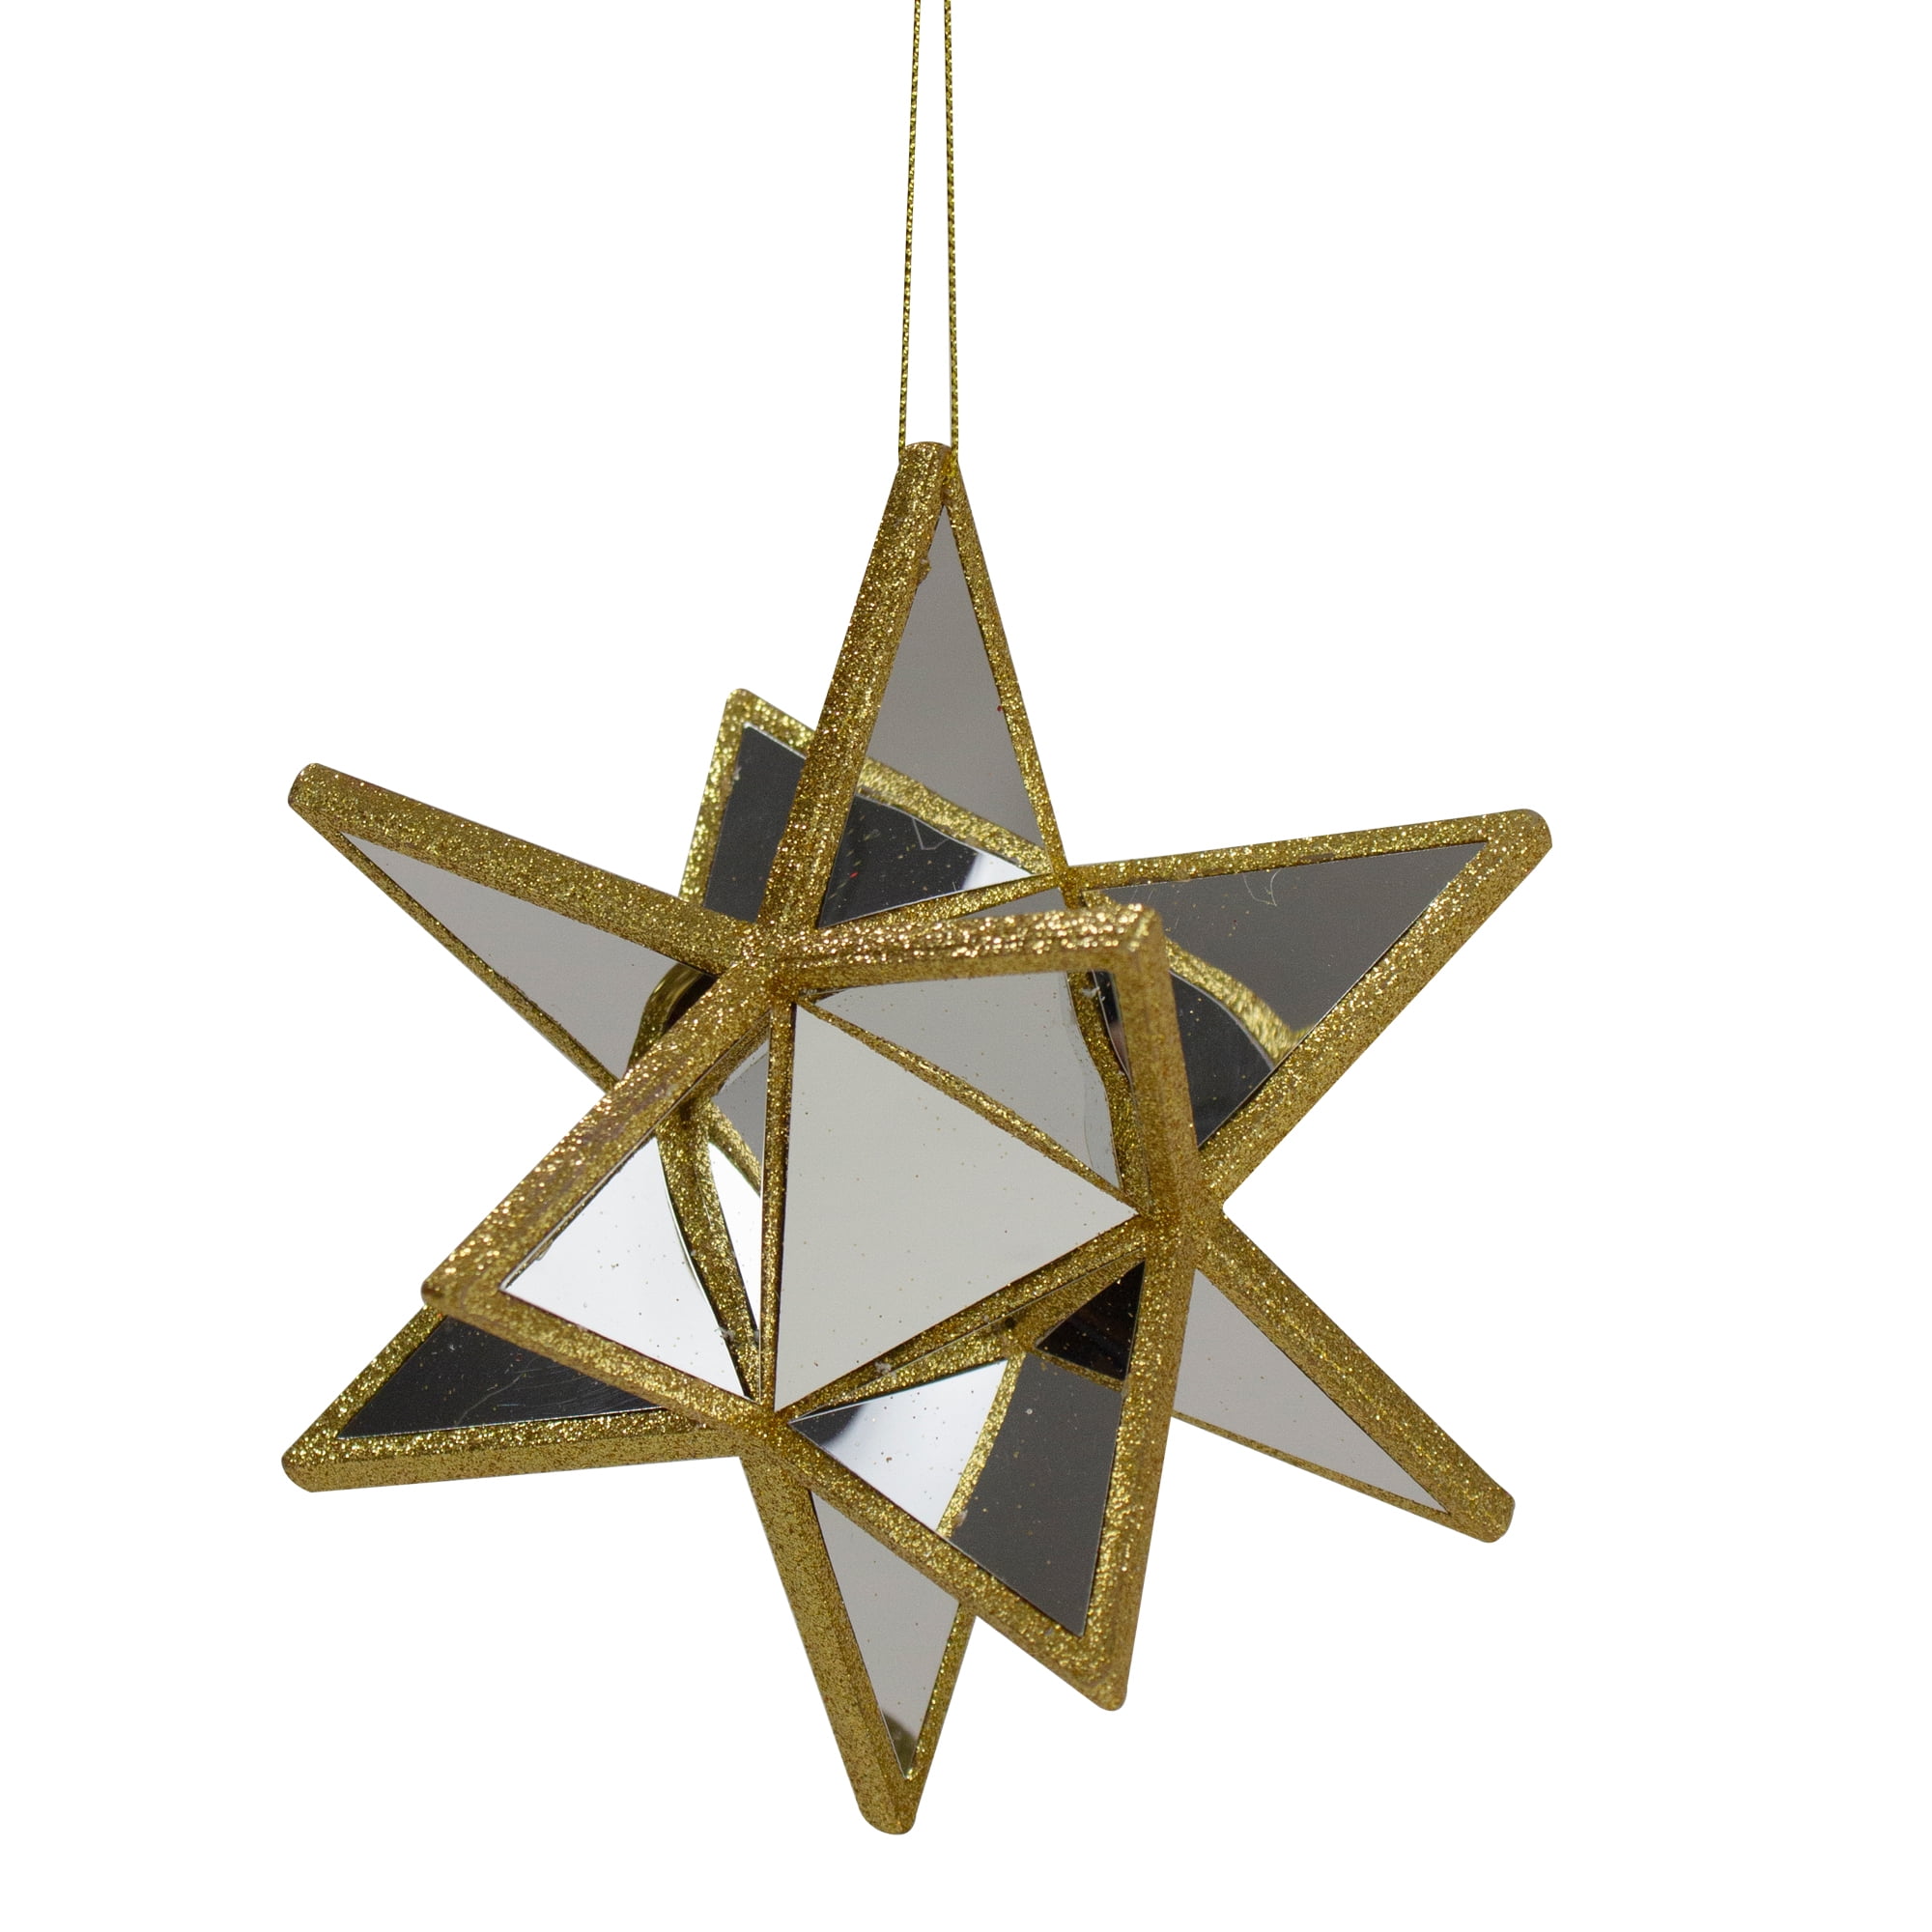 Red Glittered 5-point Angled Star-Shaped Ornament Buy $10=Free Shipping! 